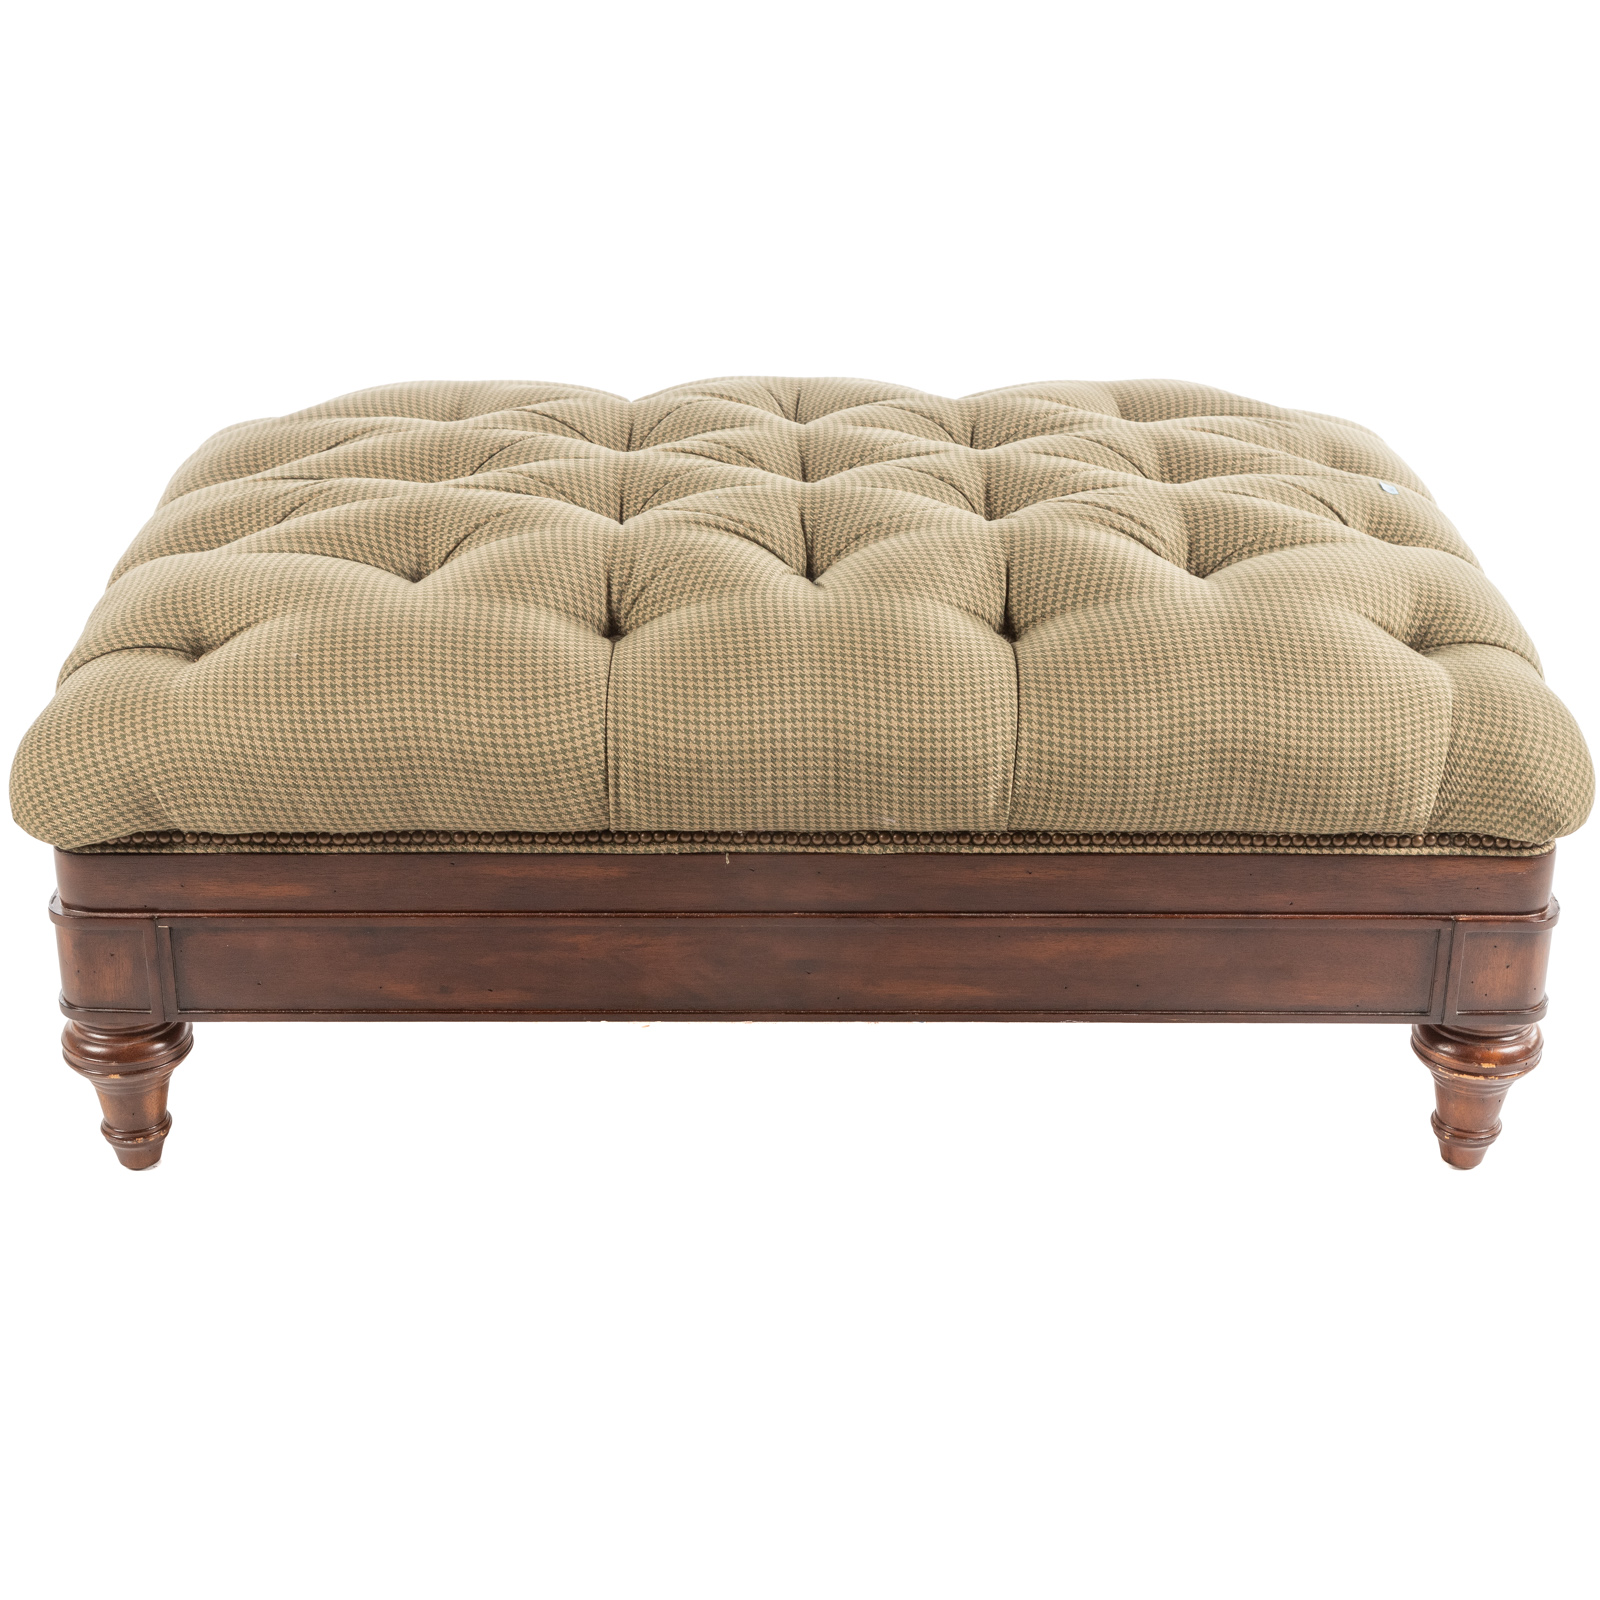 BRADINGTON YOUNG TUFTED UPHOLSTERED